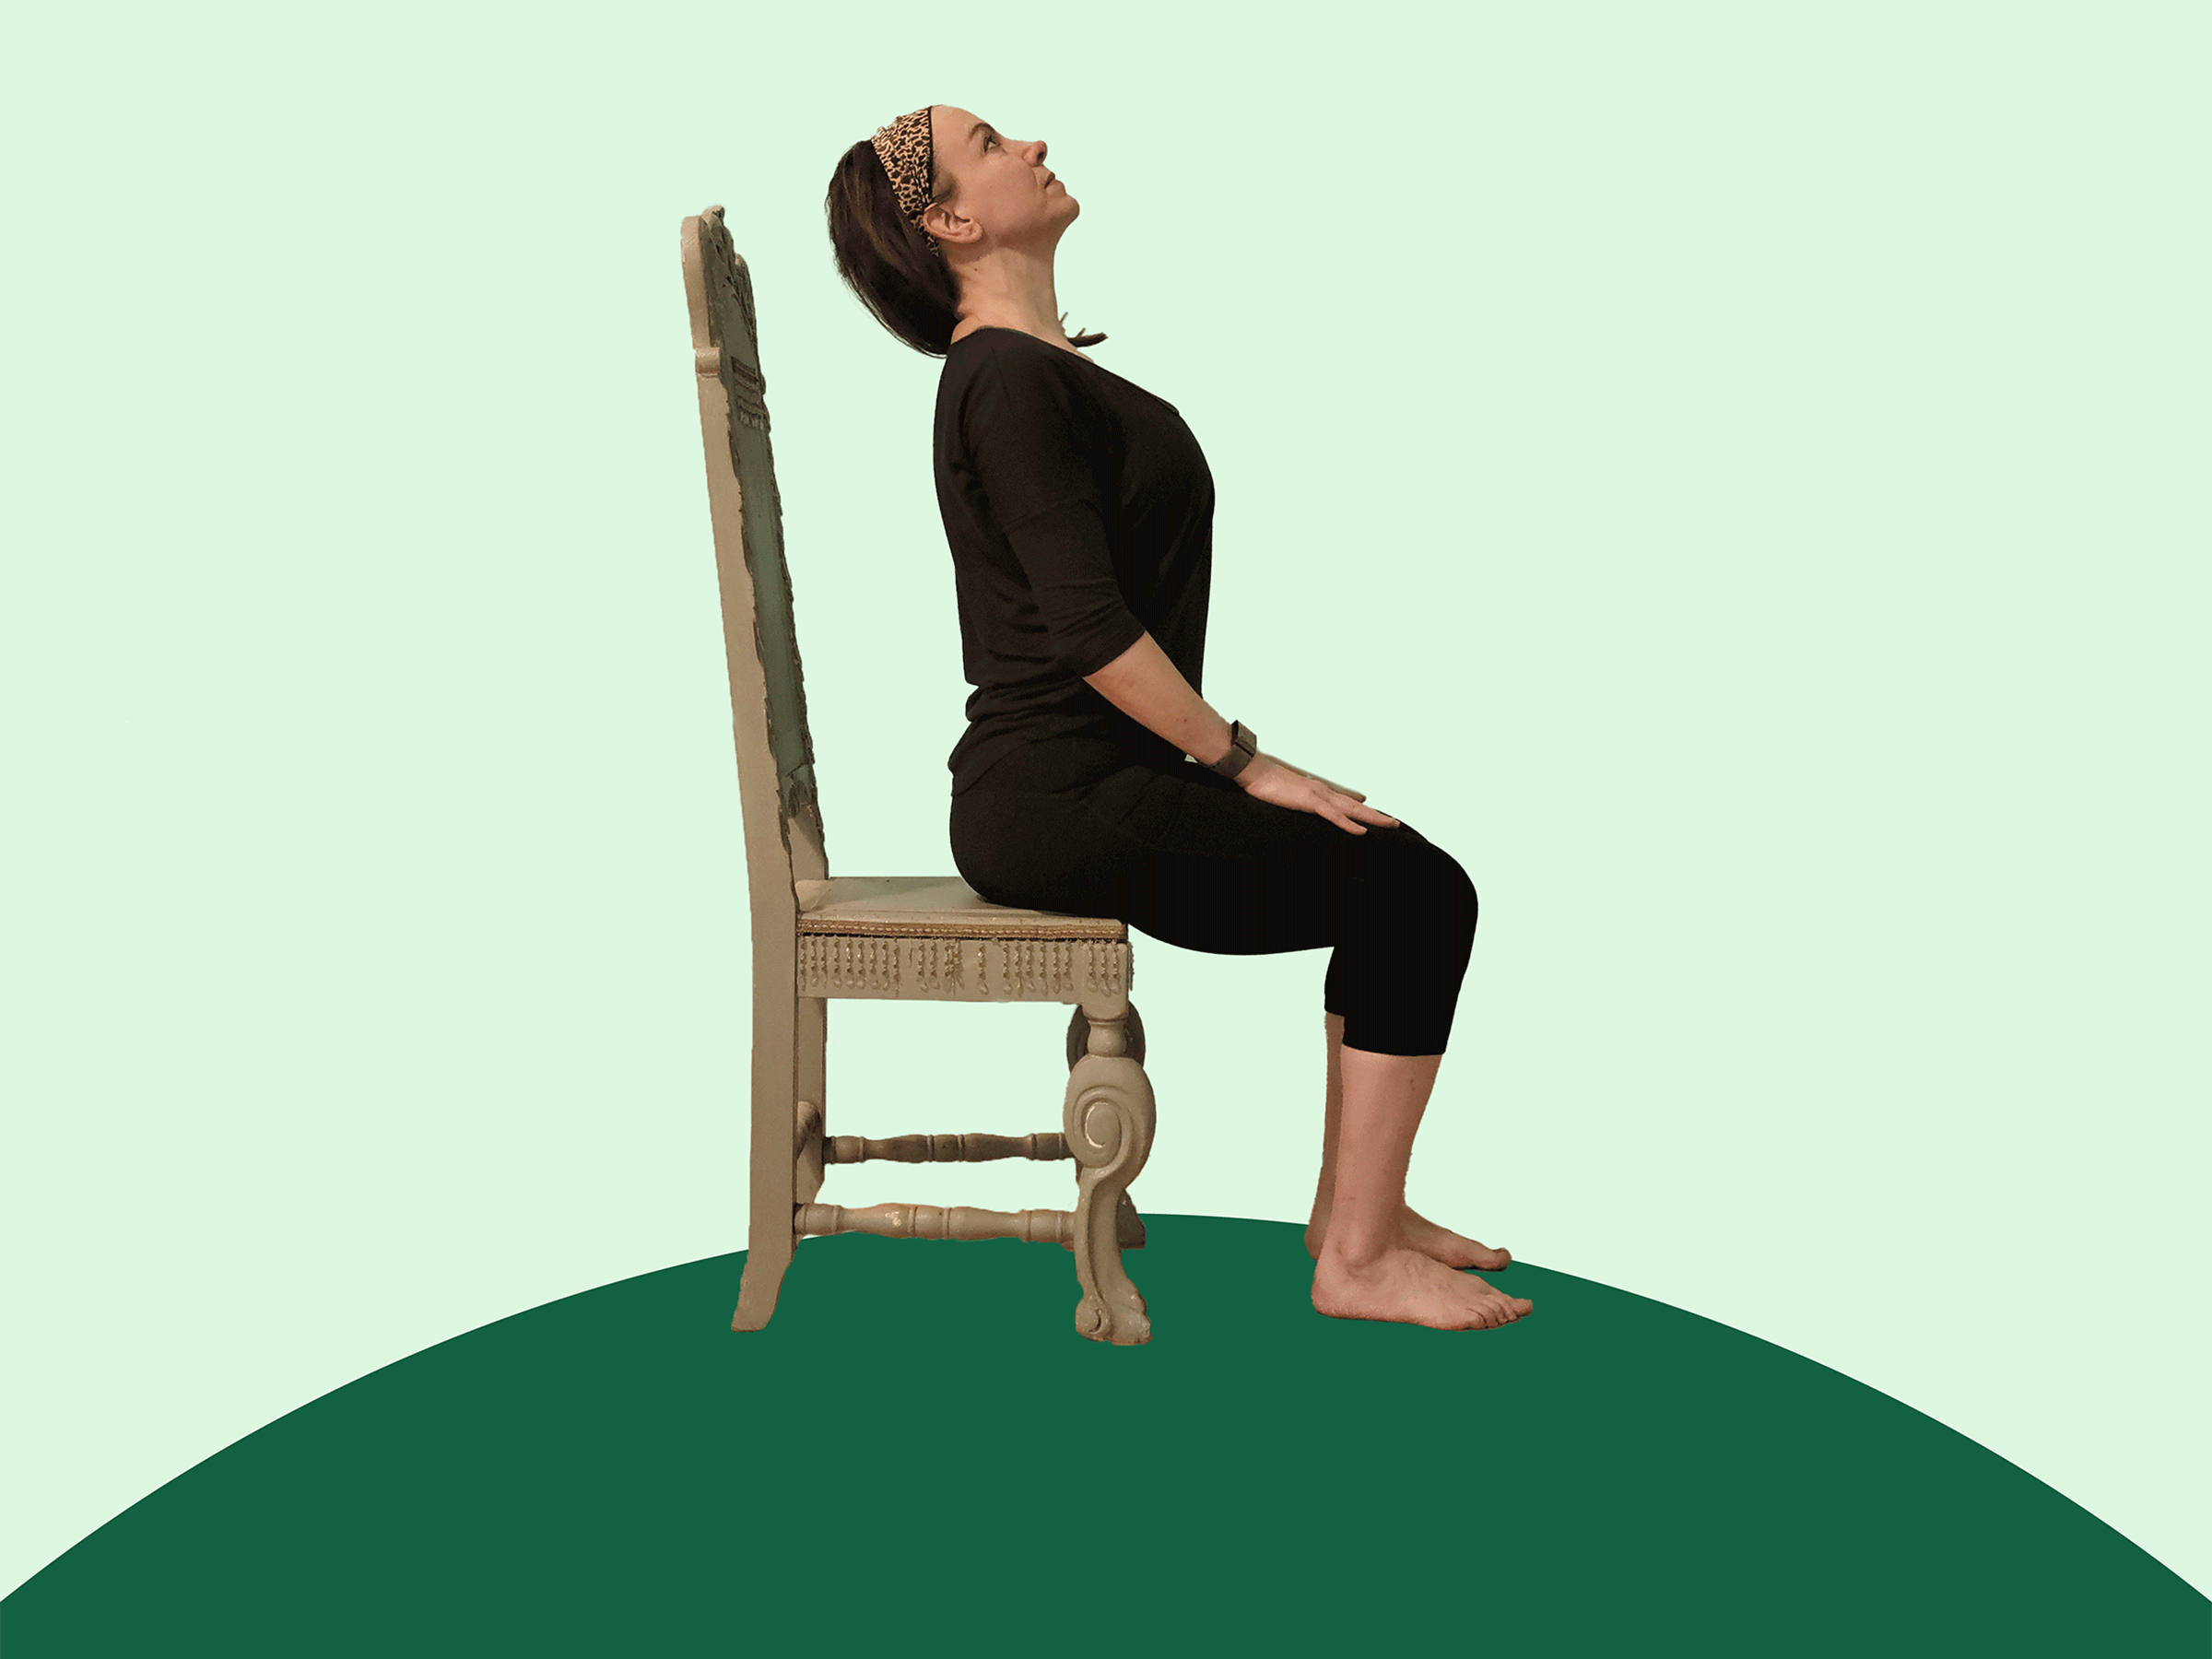 Chair Yoga For Senior Men Over 60: The Complete Guide With Quick